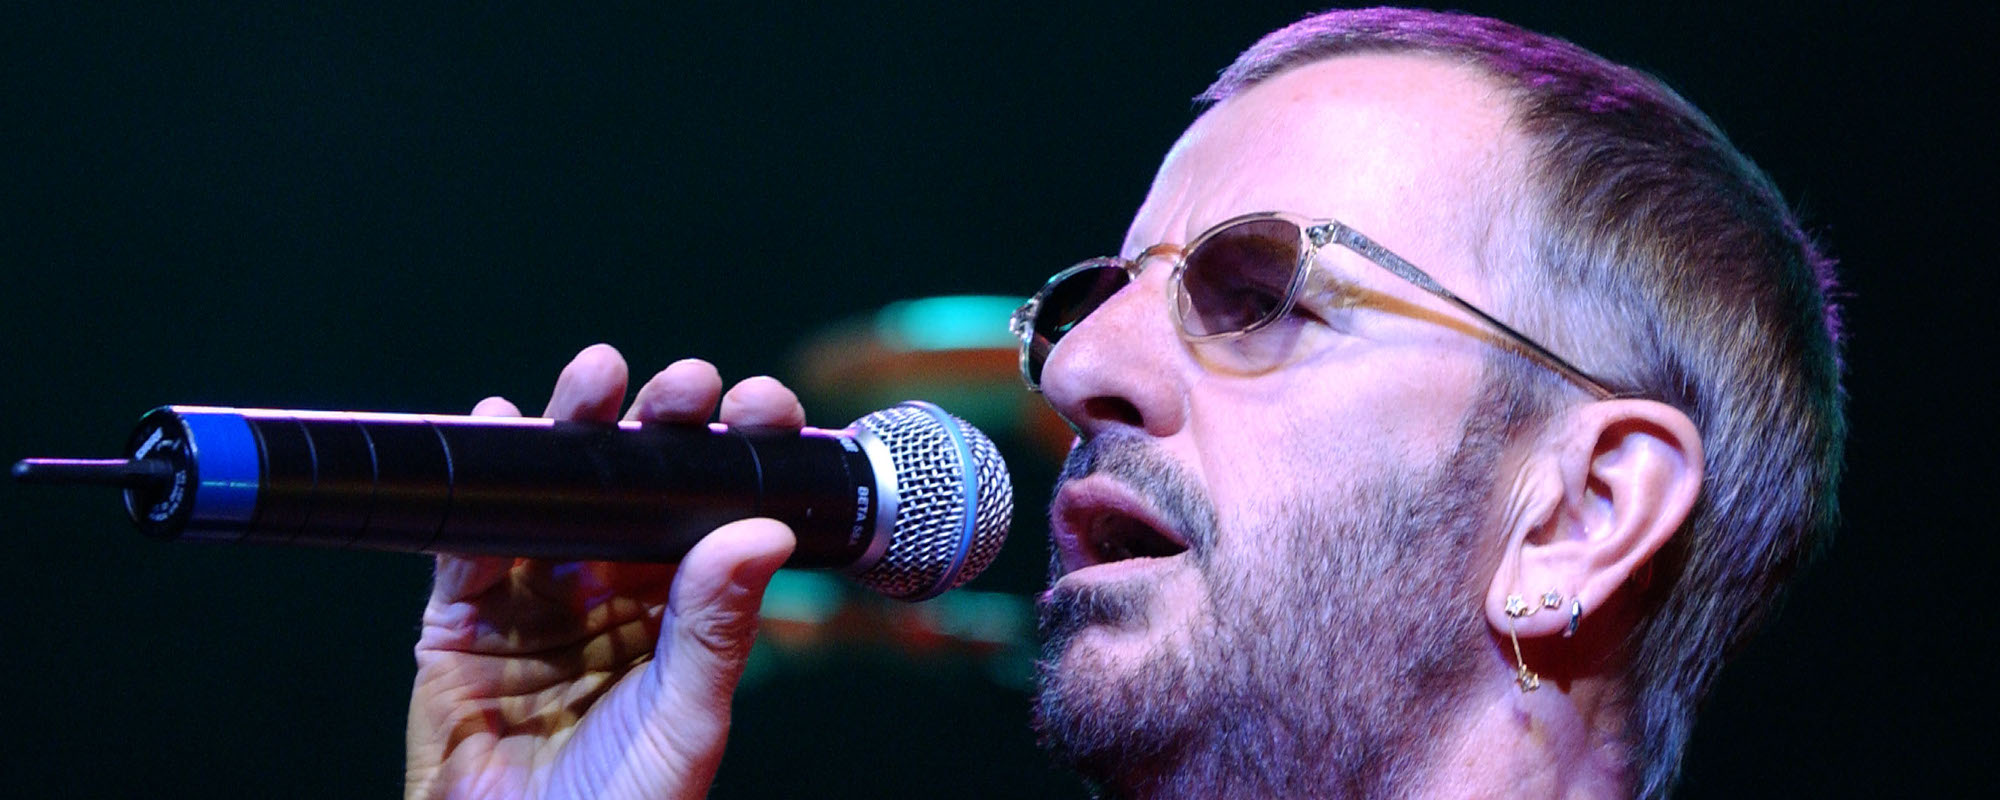 Ranking the Beatles Songs on Which Ringo Starr Sung Lead (Covers Not Included)